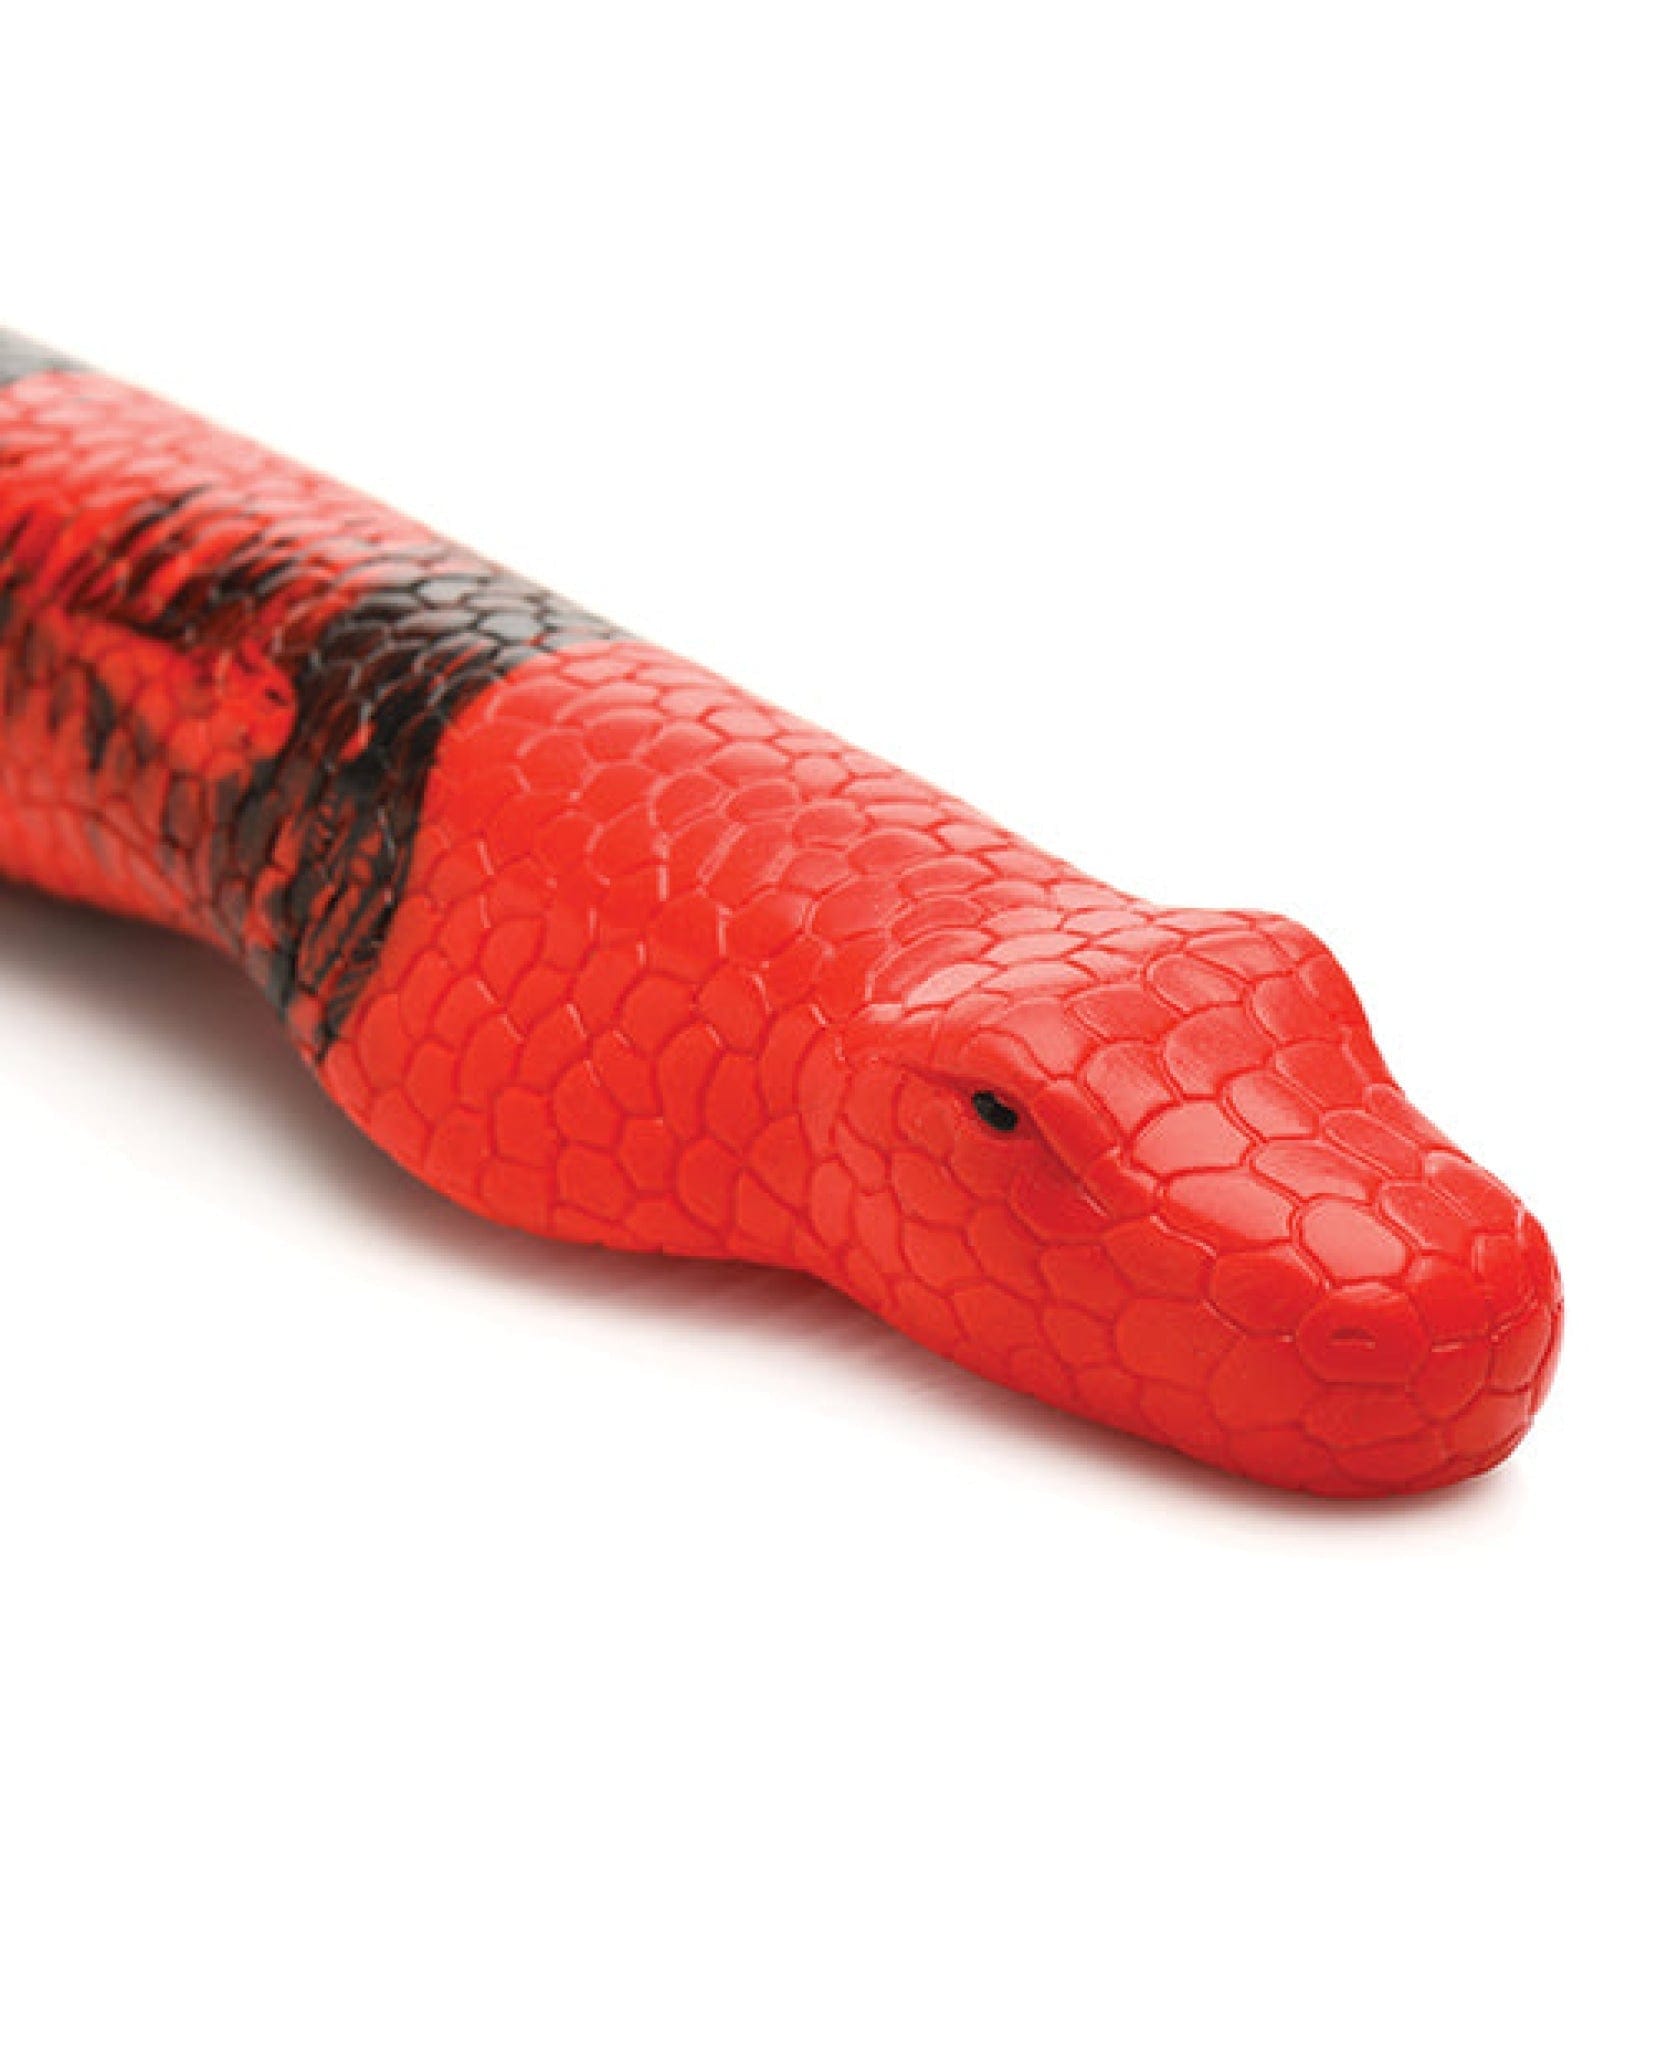 Doll Authority Dongs & Dildos Creature Cocks King Cobra X-large Silicone Dildo